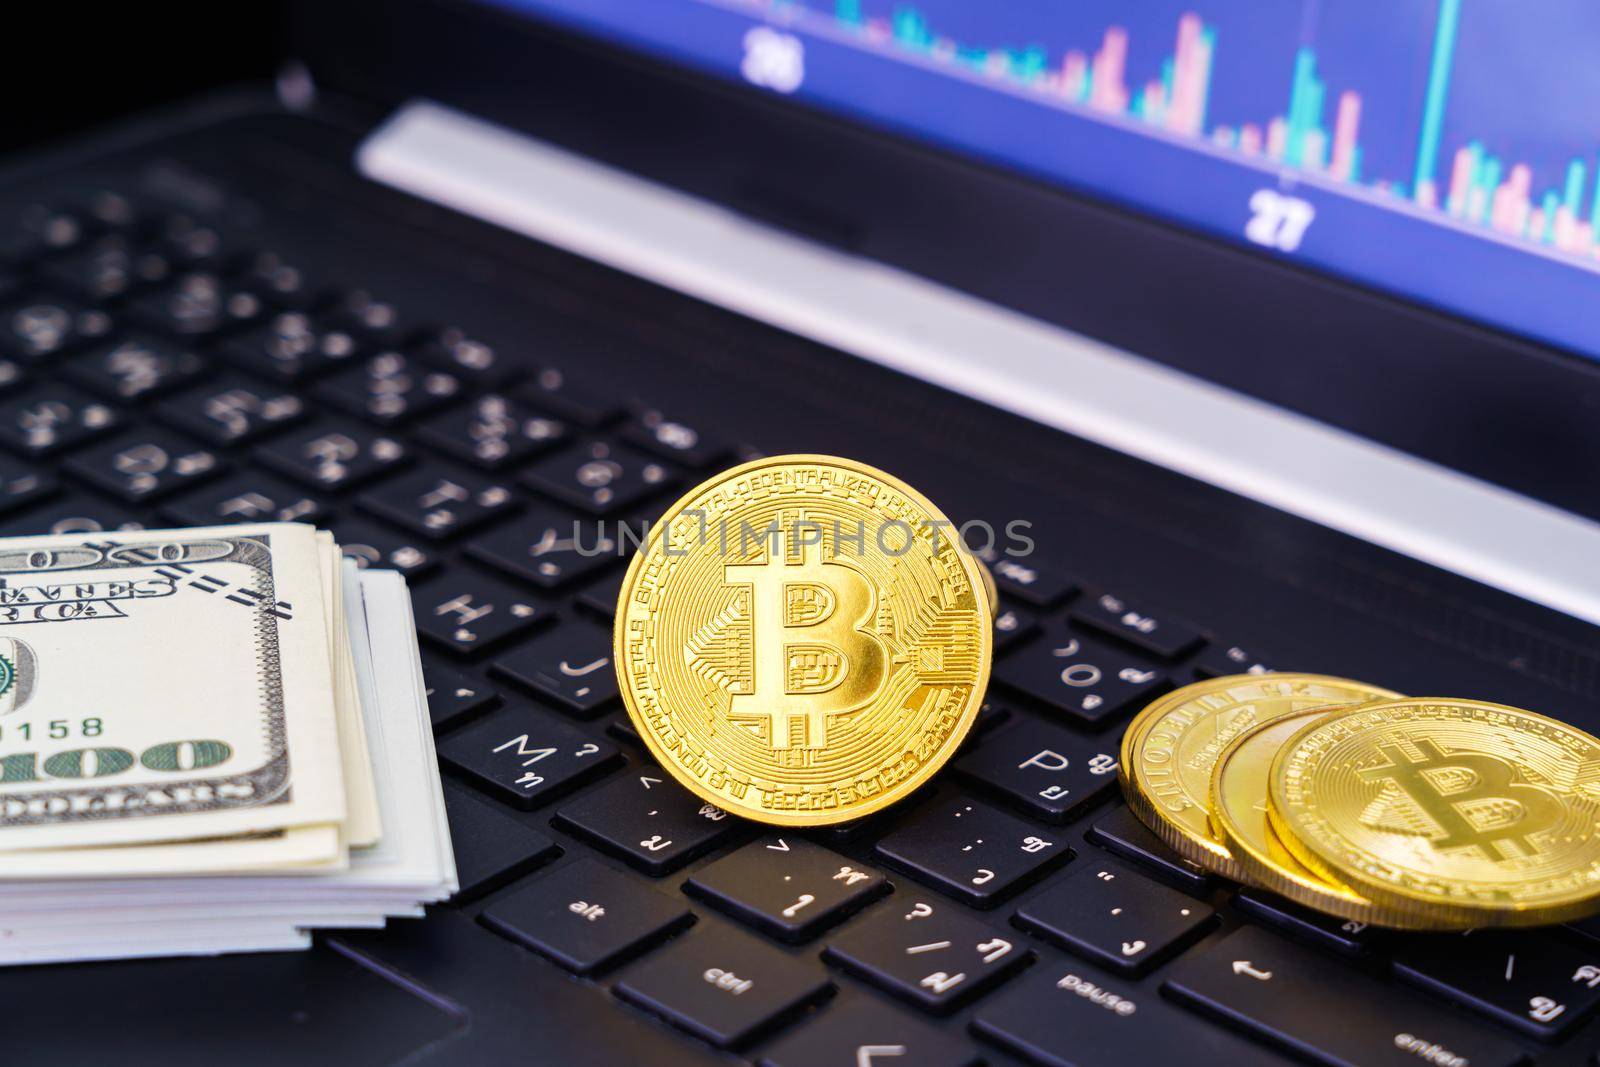 Bitcoins coin and banknotes on keyboard computer. Close up of  bitcoin crypto currency coins with trading exchange market price chart in the background